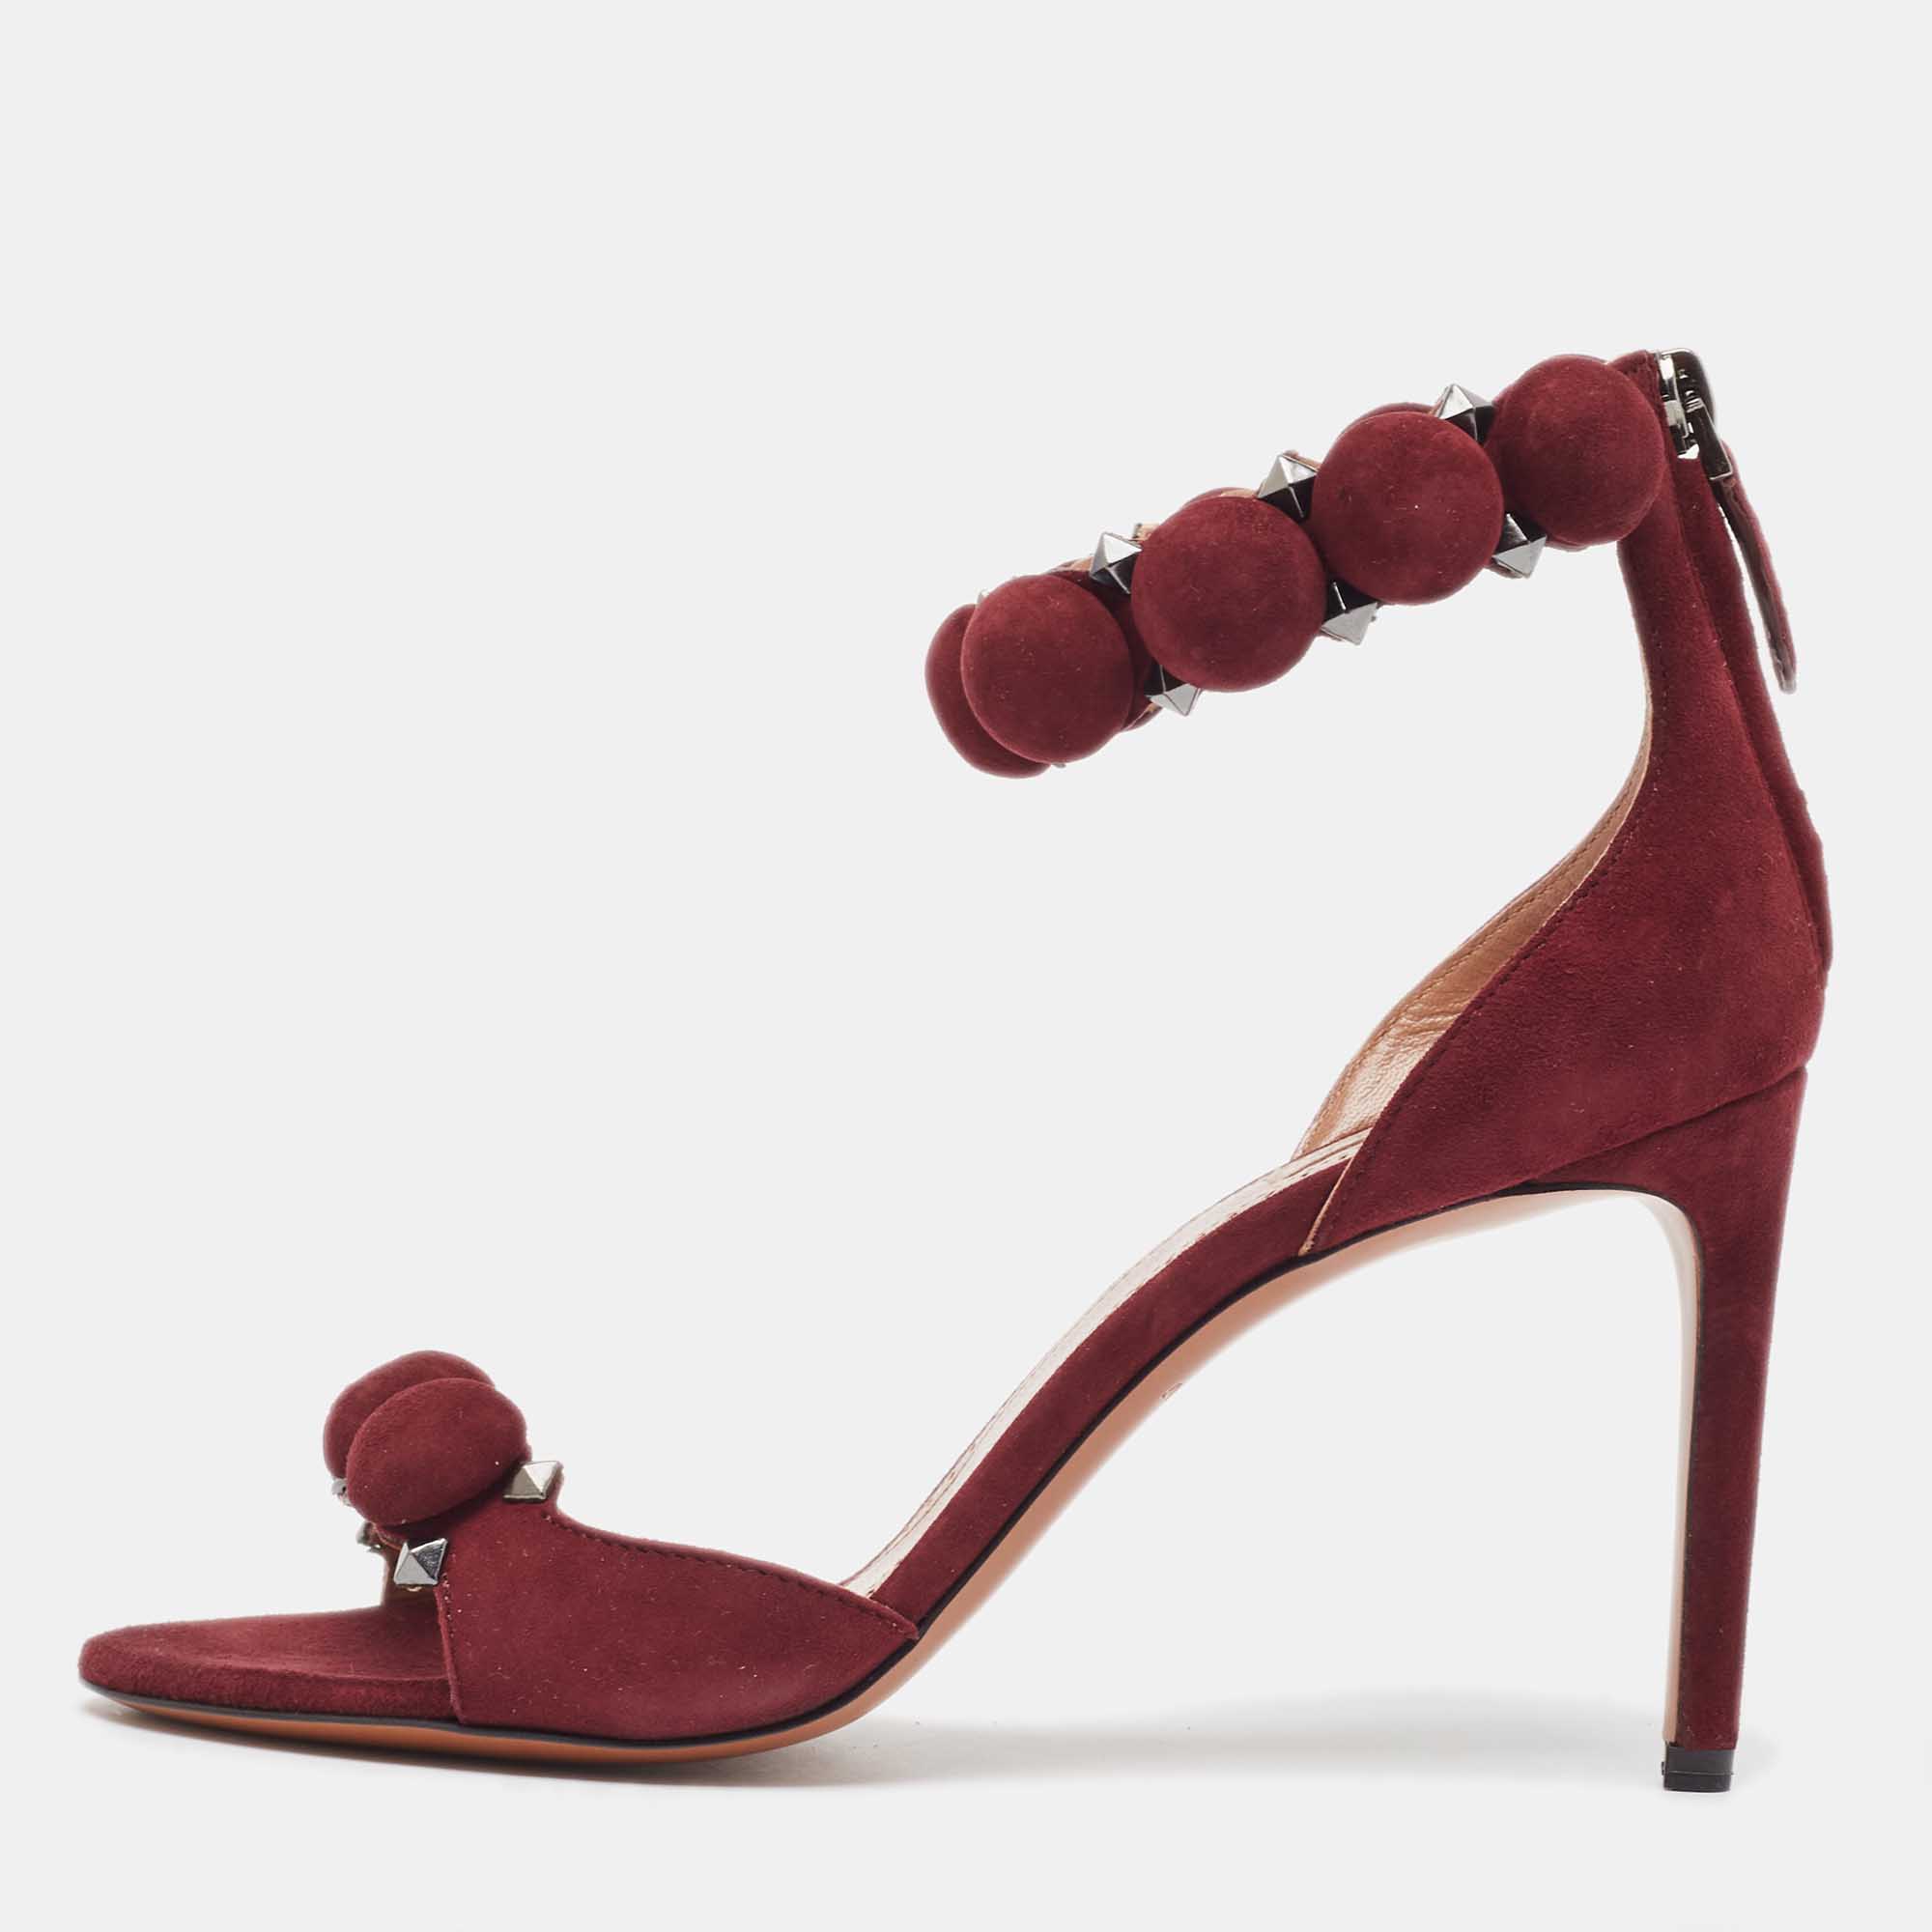 Pre-owned Alaïa Burgundy Suede Leather Chamois Bombe Ankle Cuff Sandals Size 37